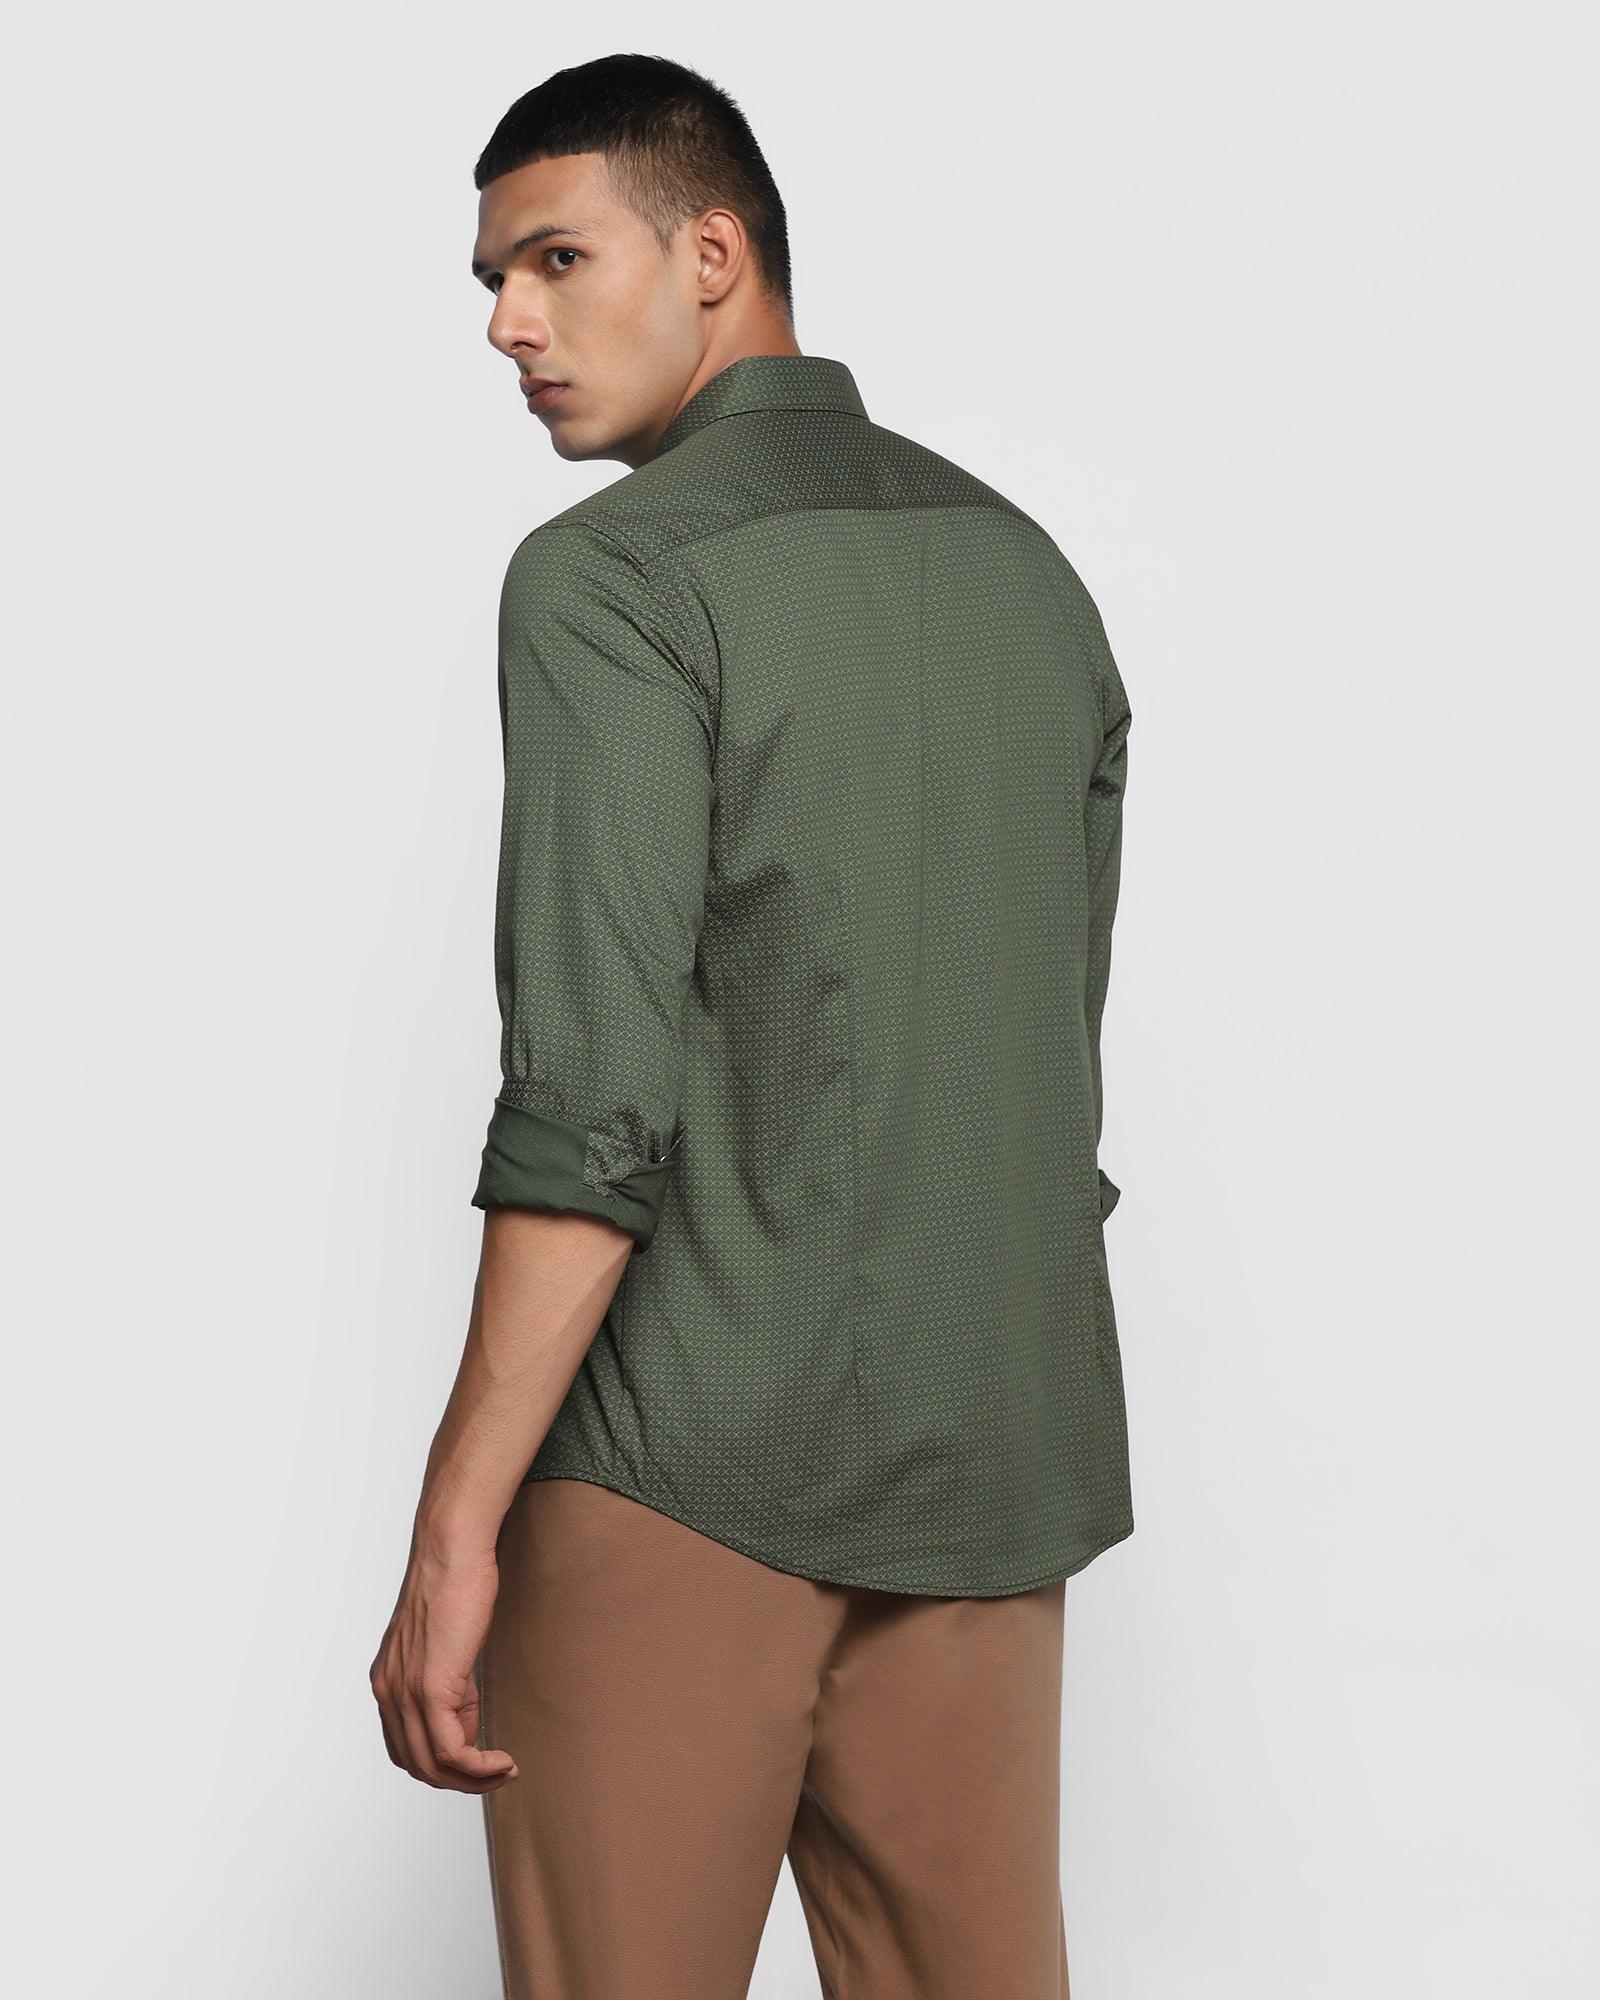 Casual Olive Printed Shirt - Floyd